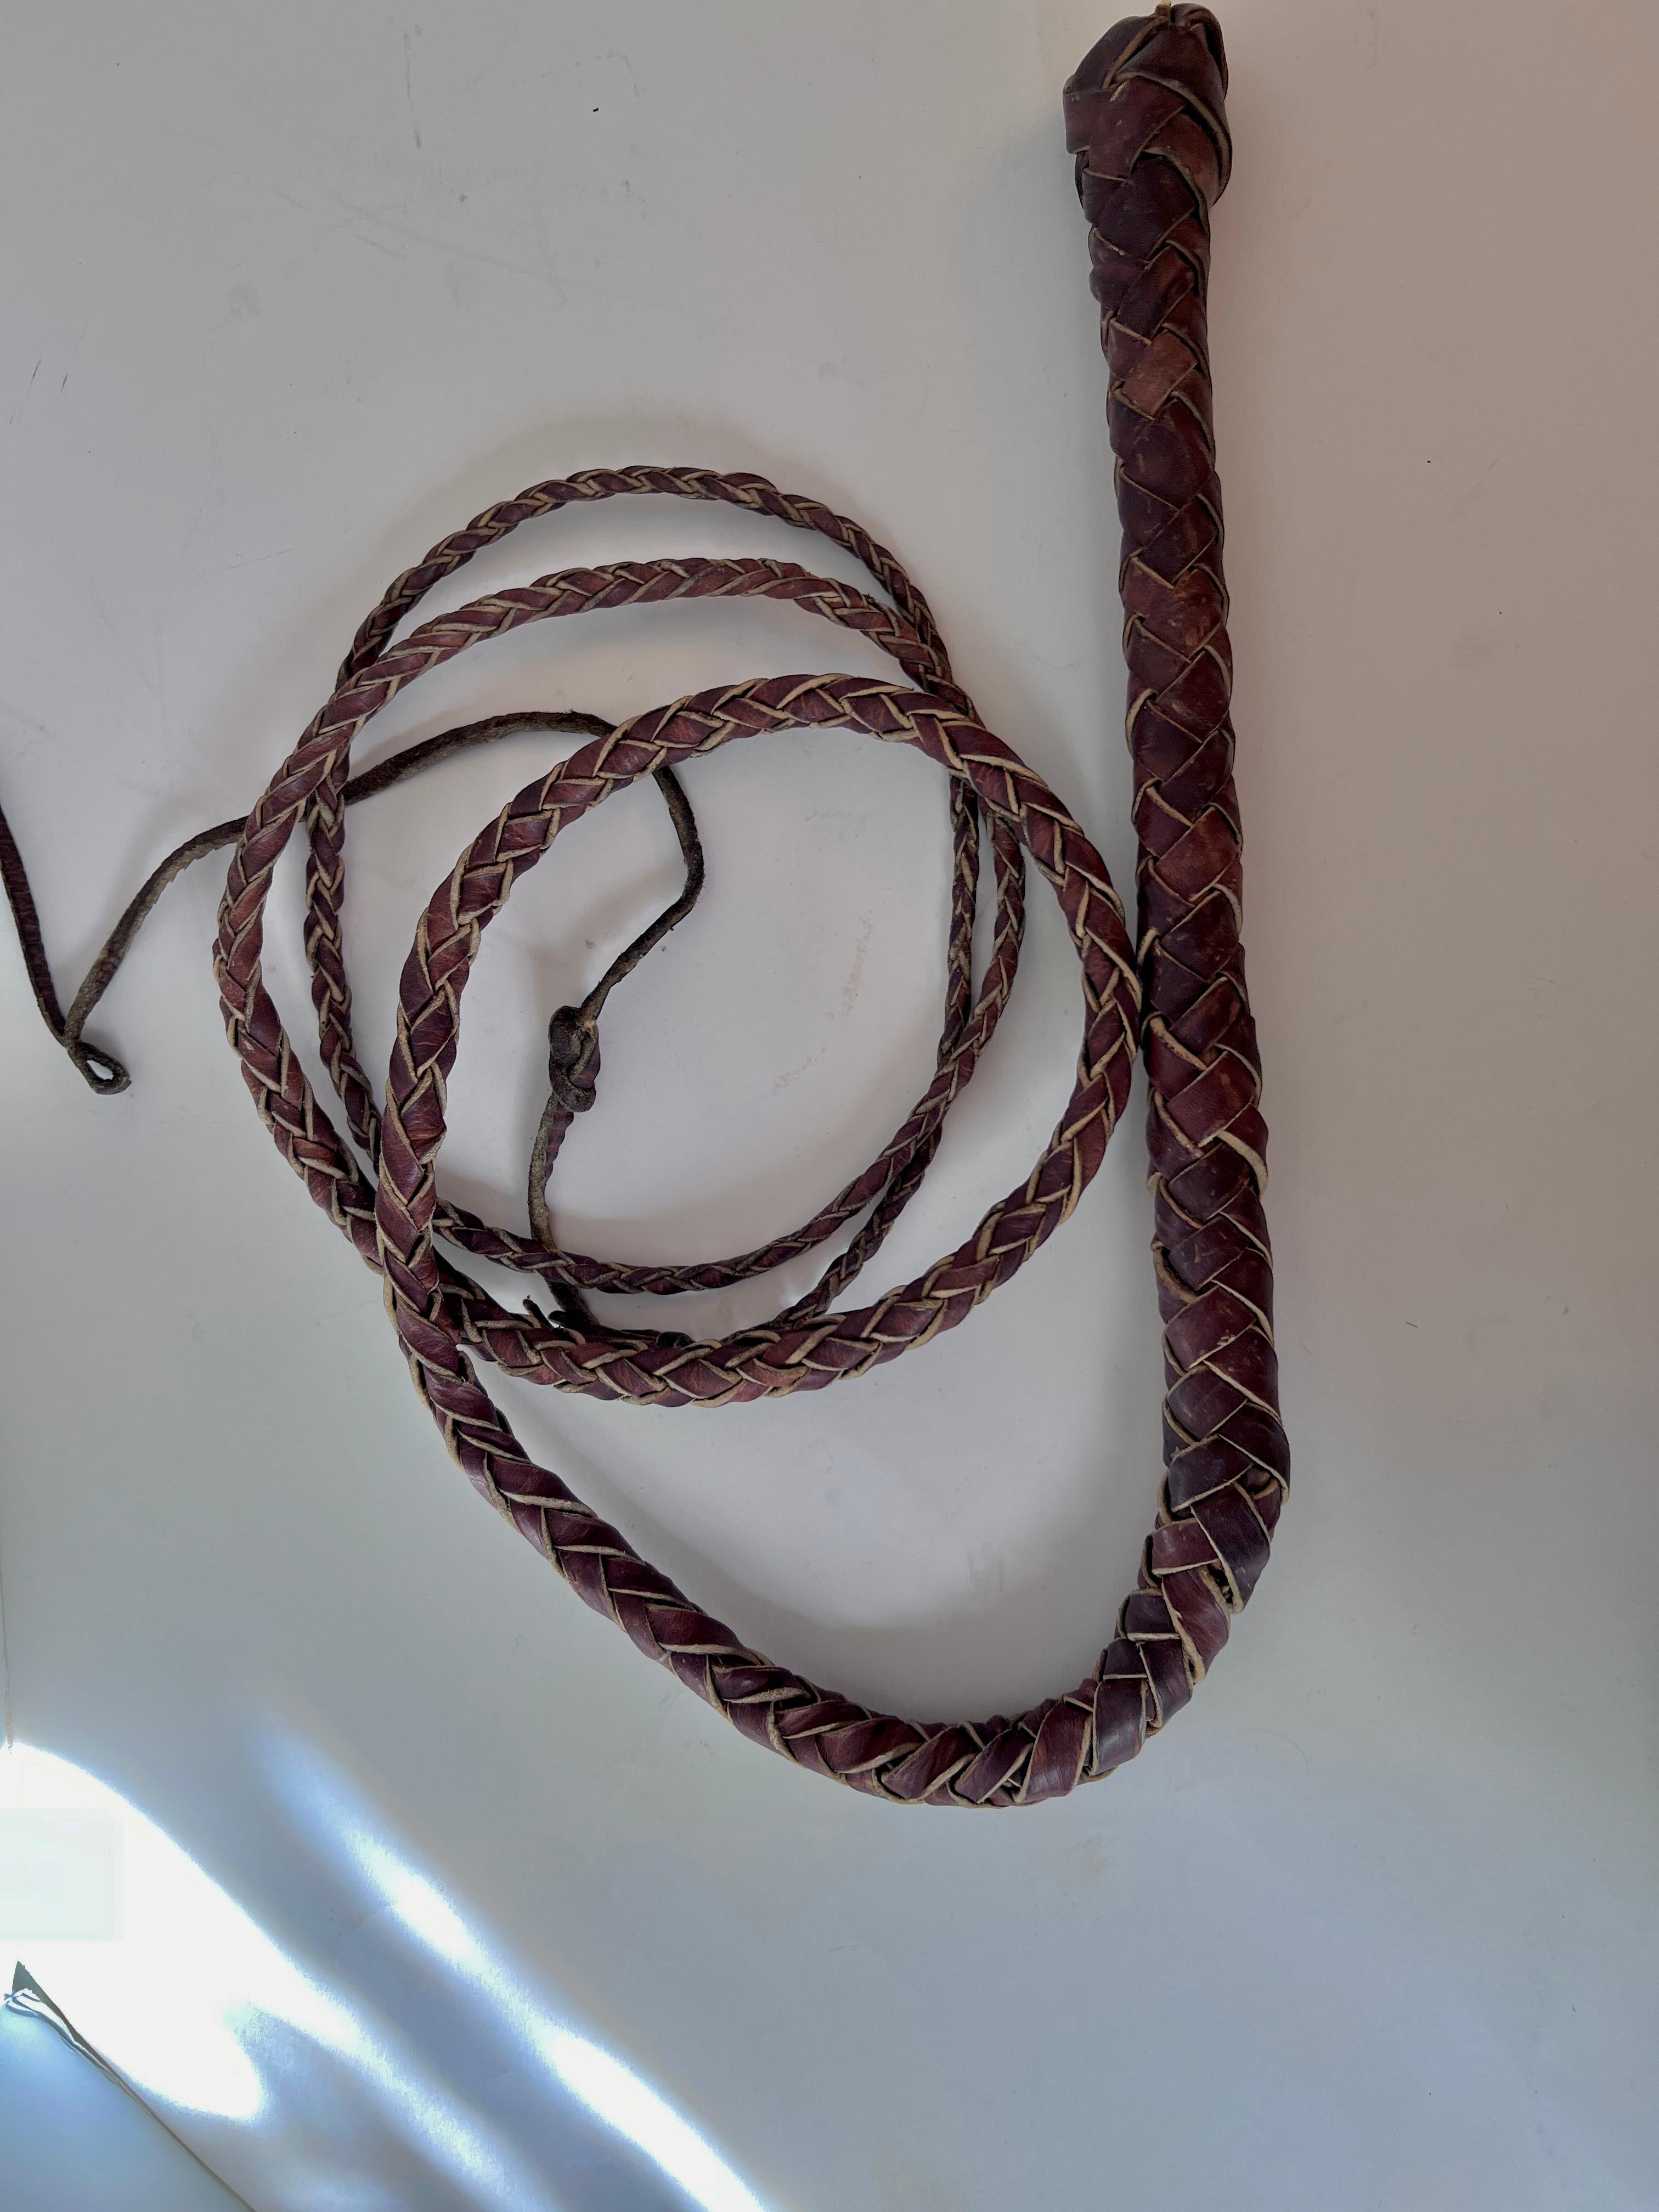 A leather had made whip.  The piece is a great decor piece in a Ralph Lauren style space or to tell a decor story with saddles, blankets and western gear.  

The piece could also be used practically in any setting from play to wrangling.